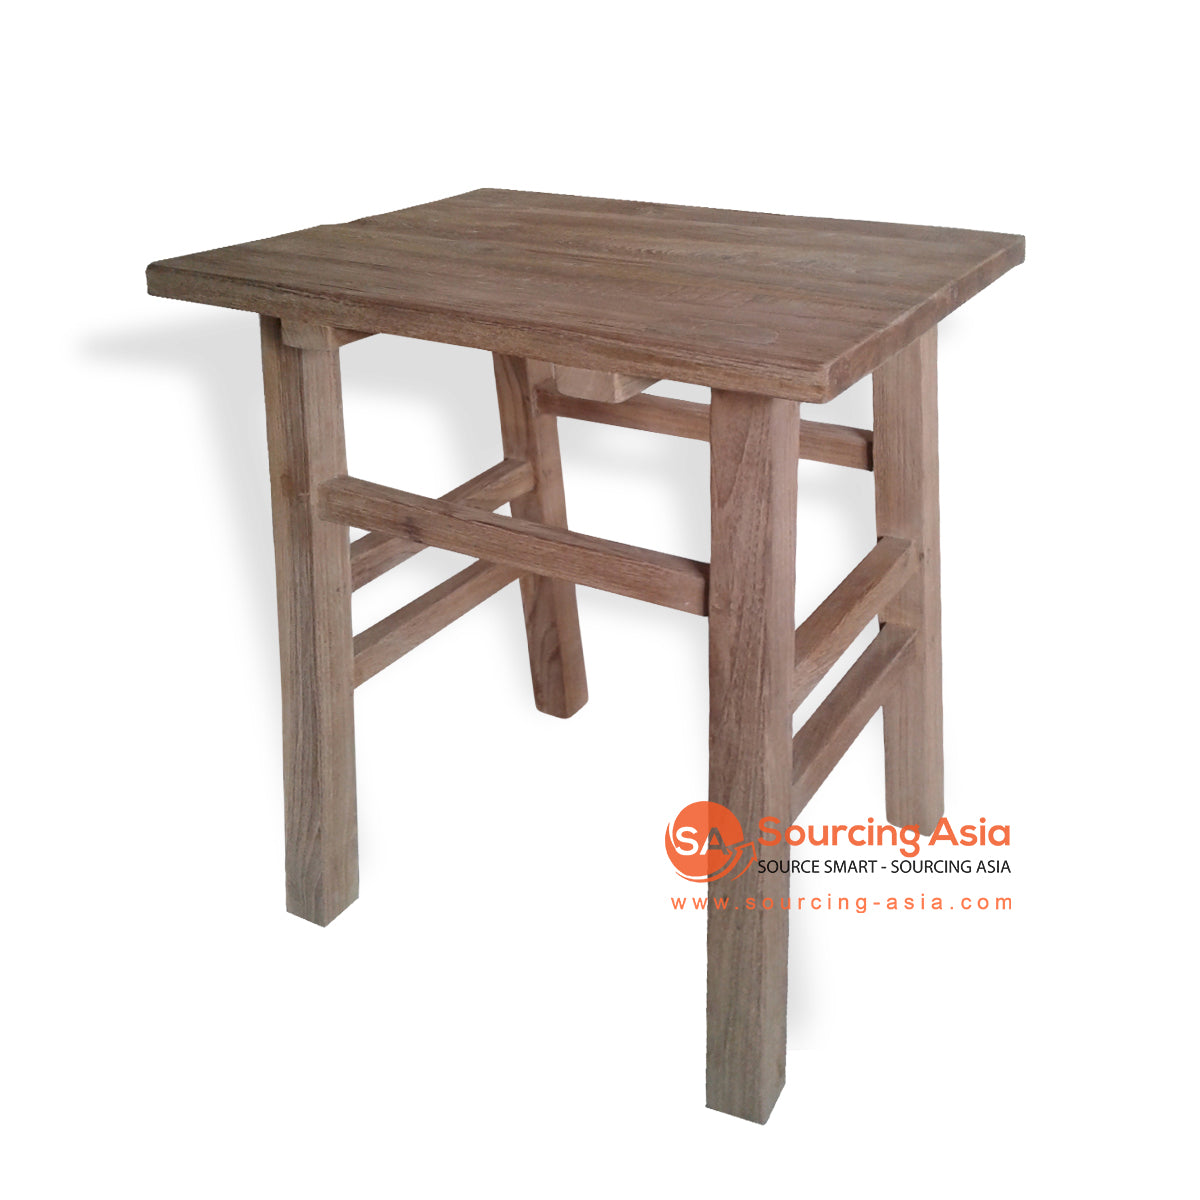 ECL158 NATURAL ROUGH RECYCLED TEAK WOOD RUSTIC BAR TABLE